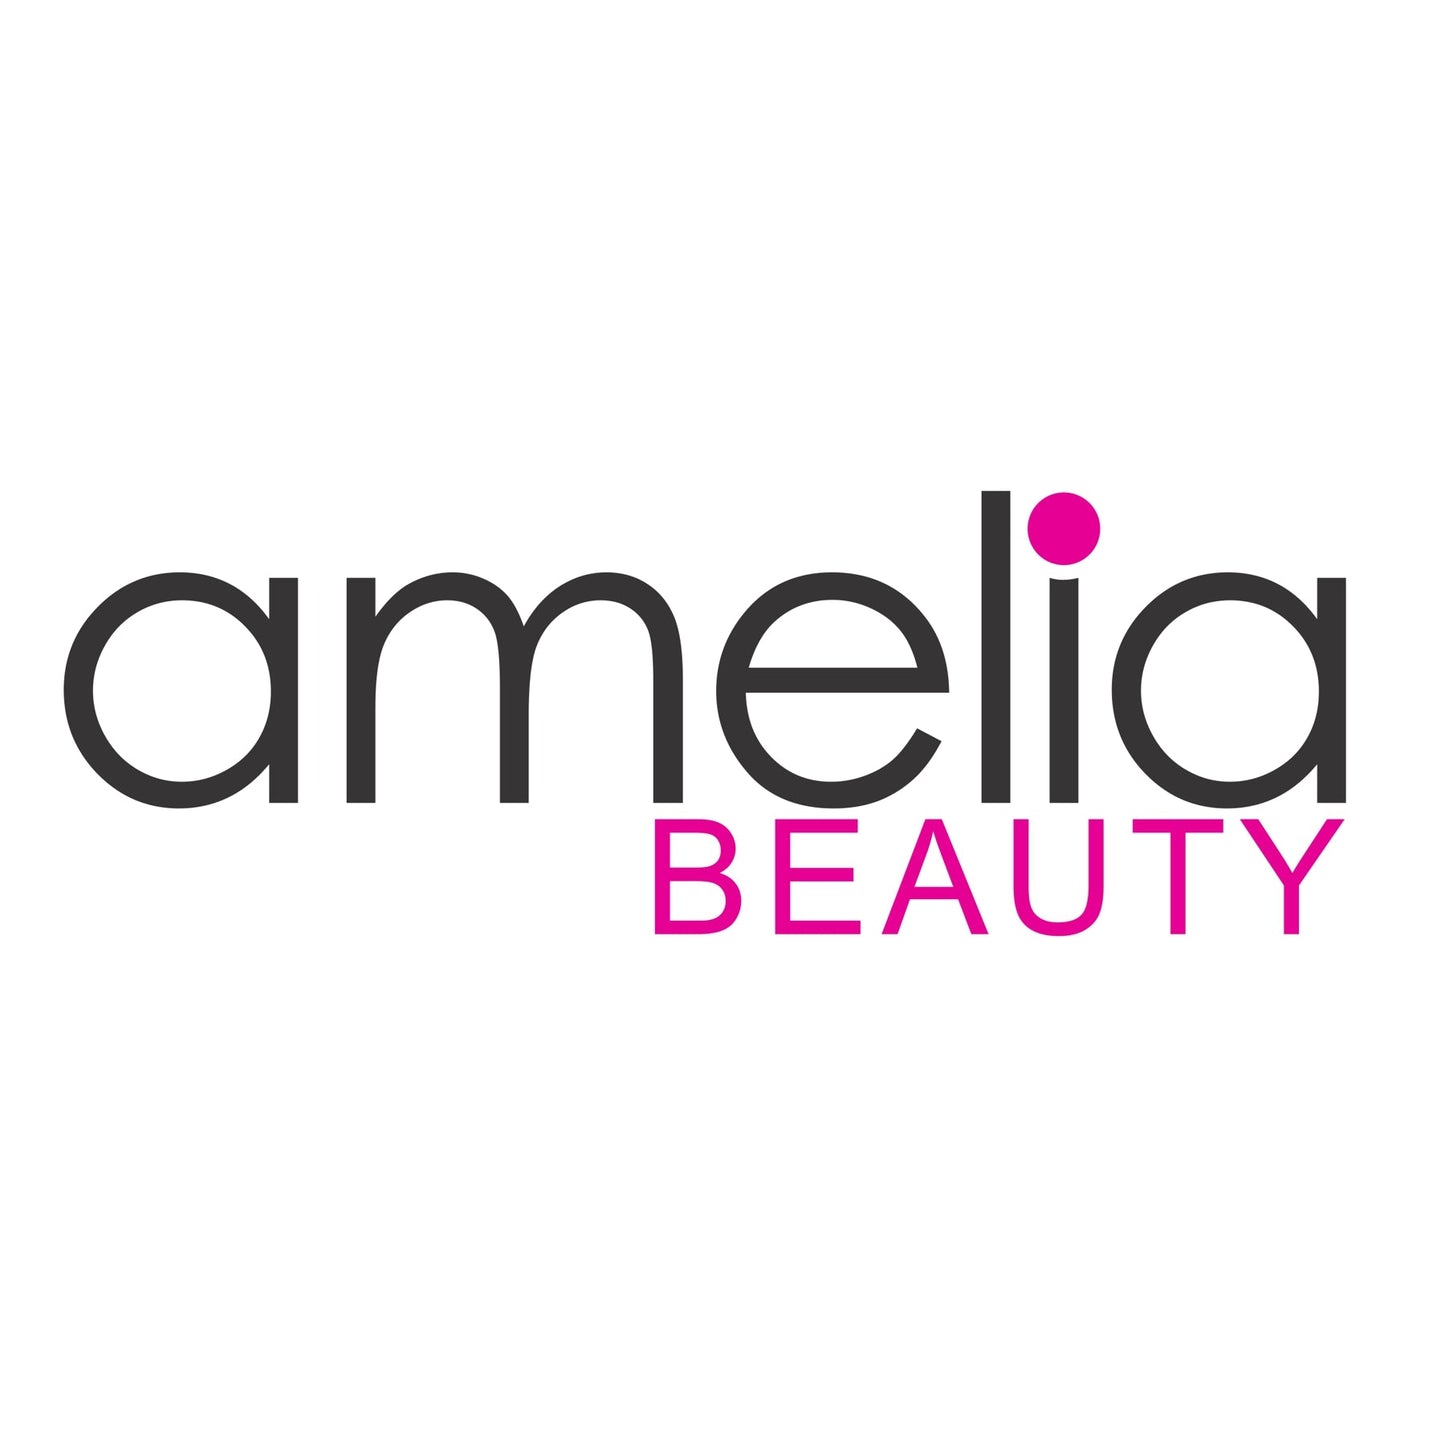 Amelia Beauty | 1/2in, Black and Creme Mix, Elastic Rubber Band Pony Tail Holders | Made in USA, Ideal for Ponytails, Braids, Twists, Dreadlocks, Styling Accessories for Women, Men and Girls | 500 Pack